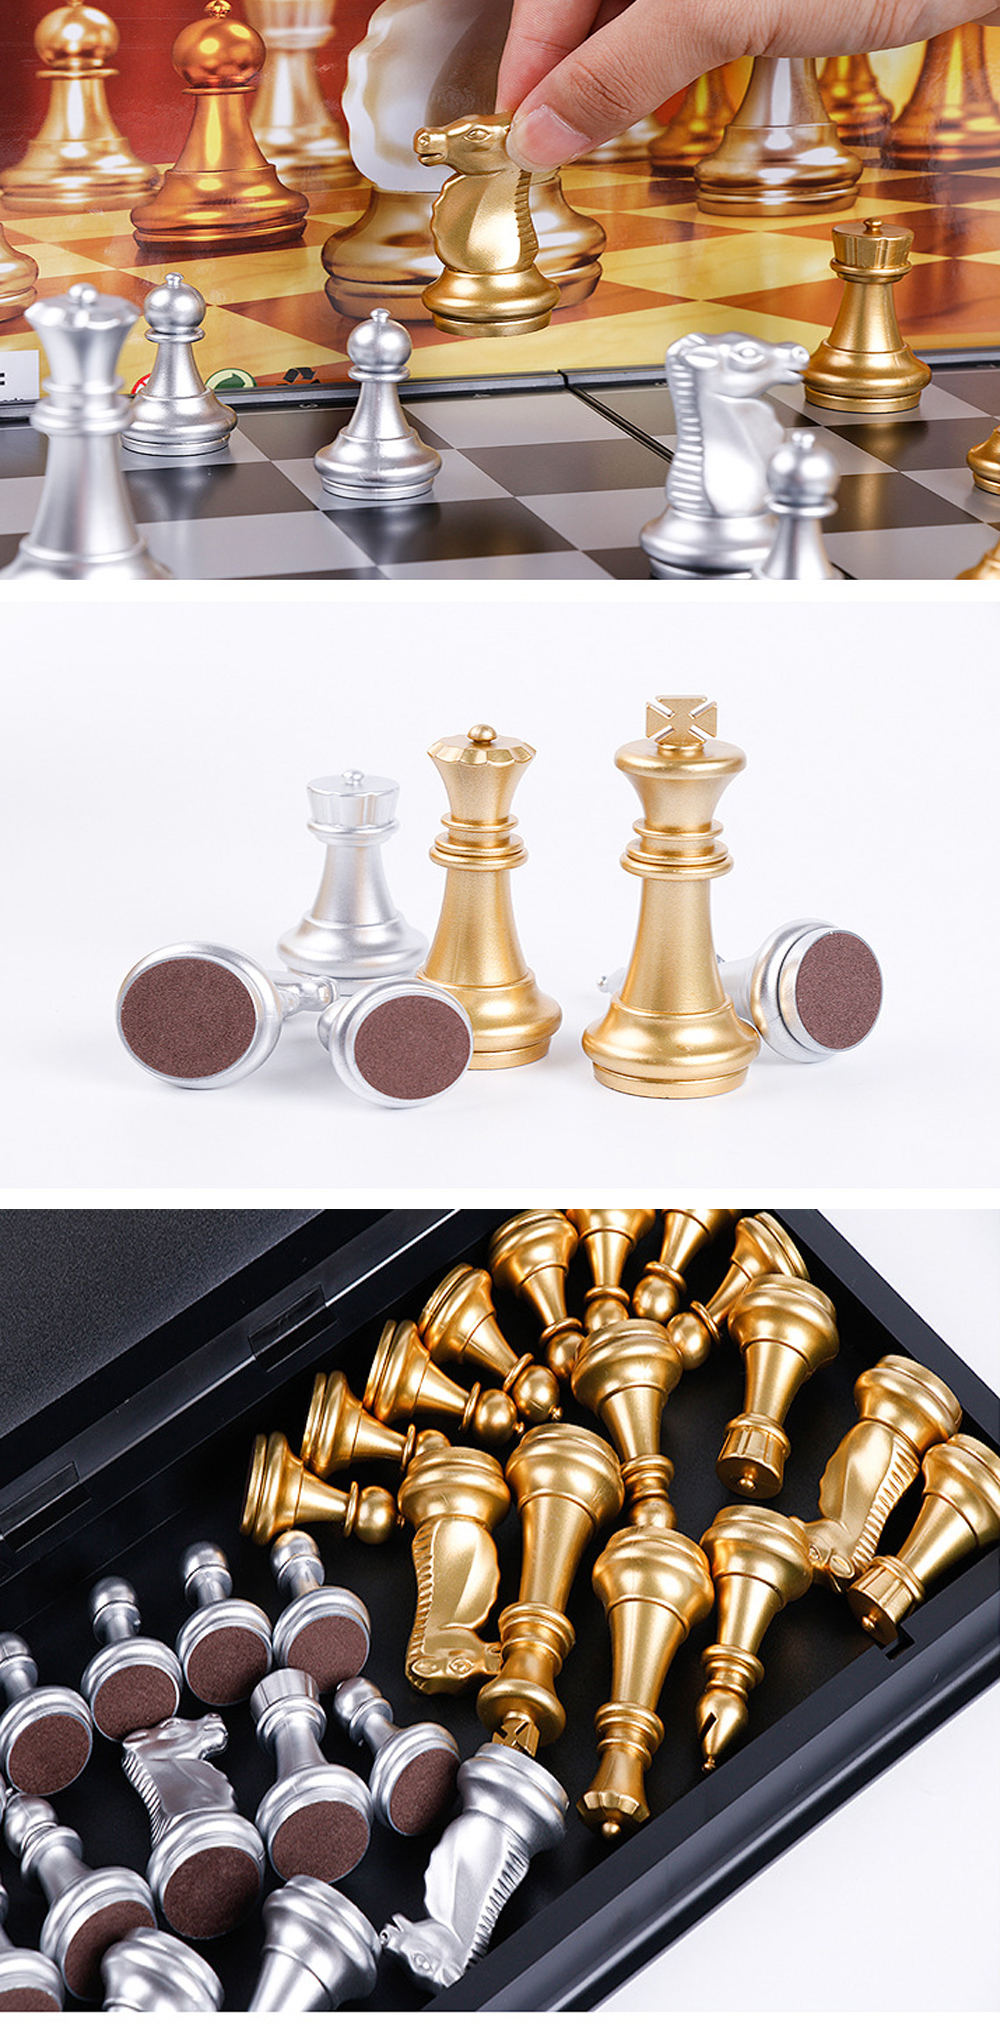 32PCS-Medieval-Chess-Set-With-High-Quality-Chessboard-Gold-Silver-Chess-Pieces-Magnetic-Board-Game-C-1841255-7